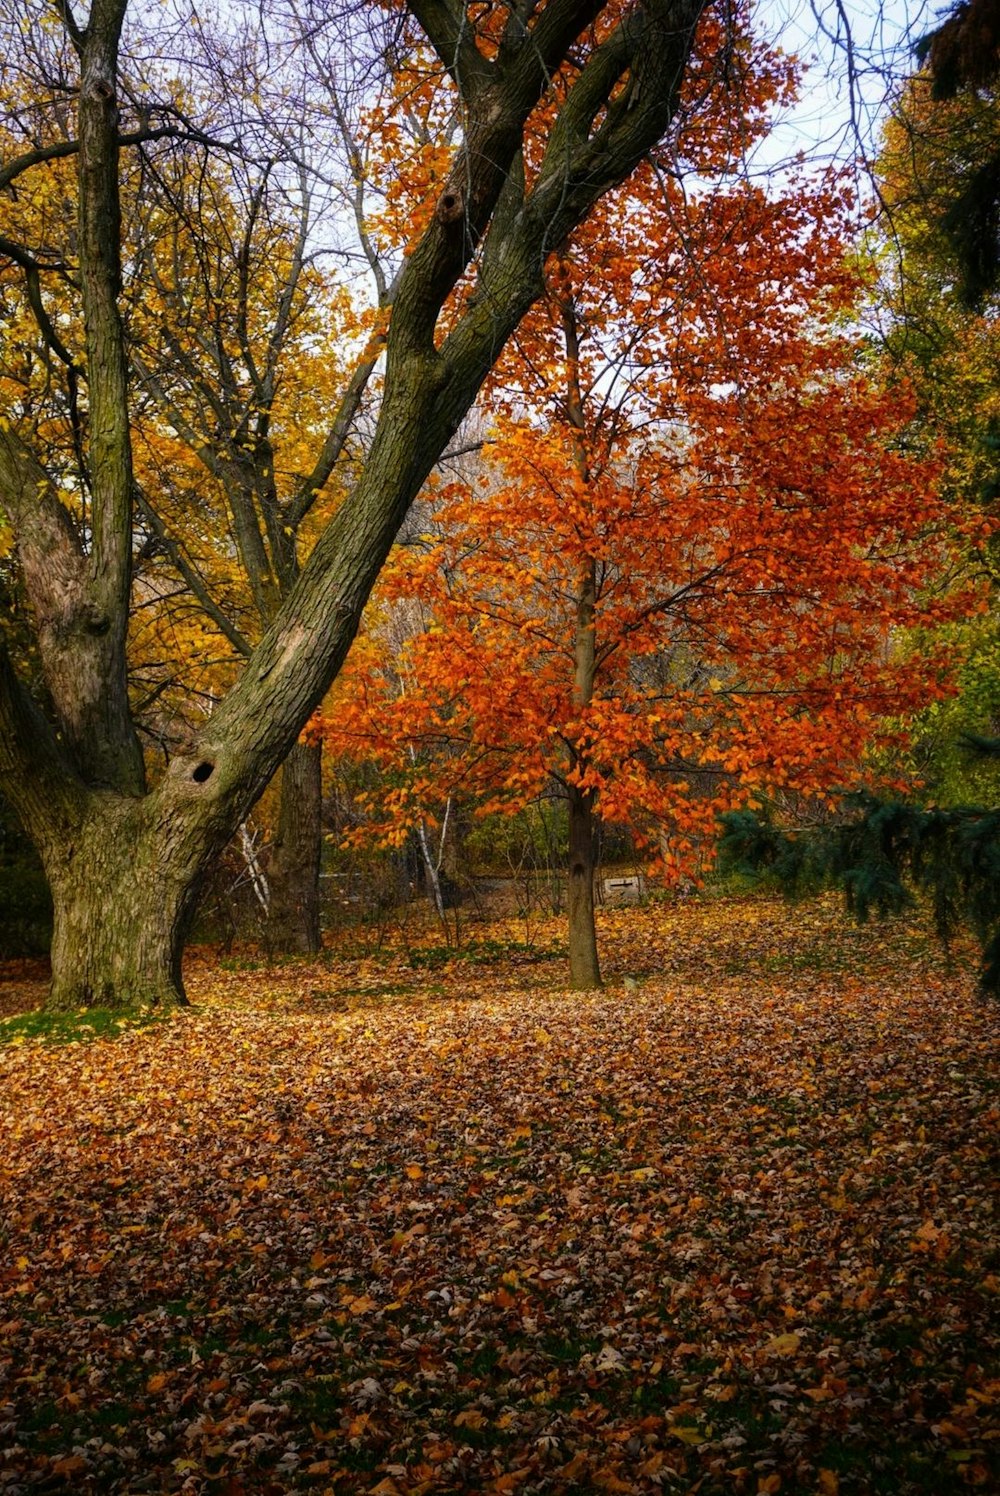 a tree in a park with lots of leaves on the ground